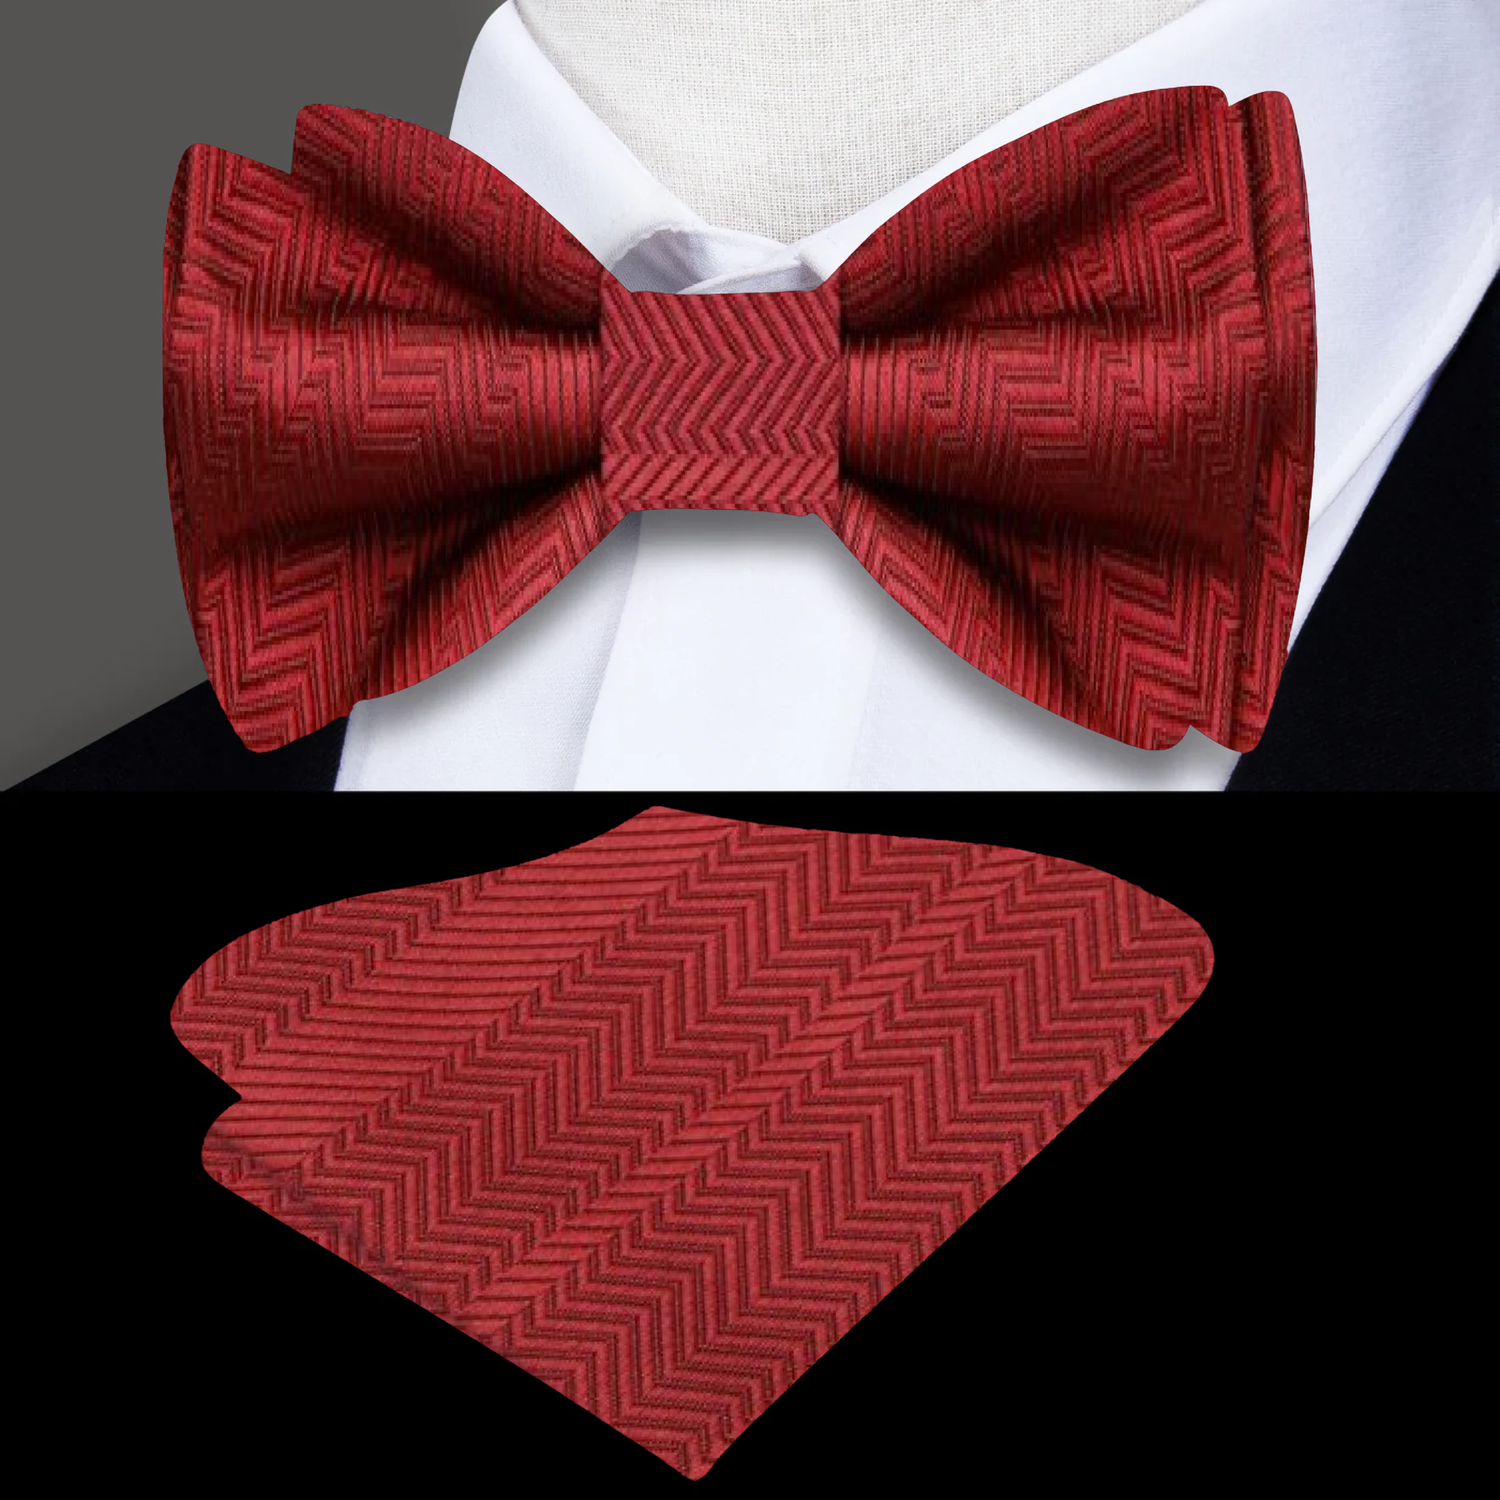 Main: A Garnet Red Solid Pattern Self Tie Bow Tie, Matching Pocket Square||Garnet Red